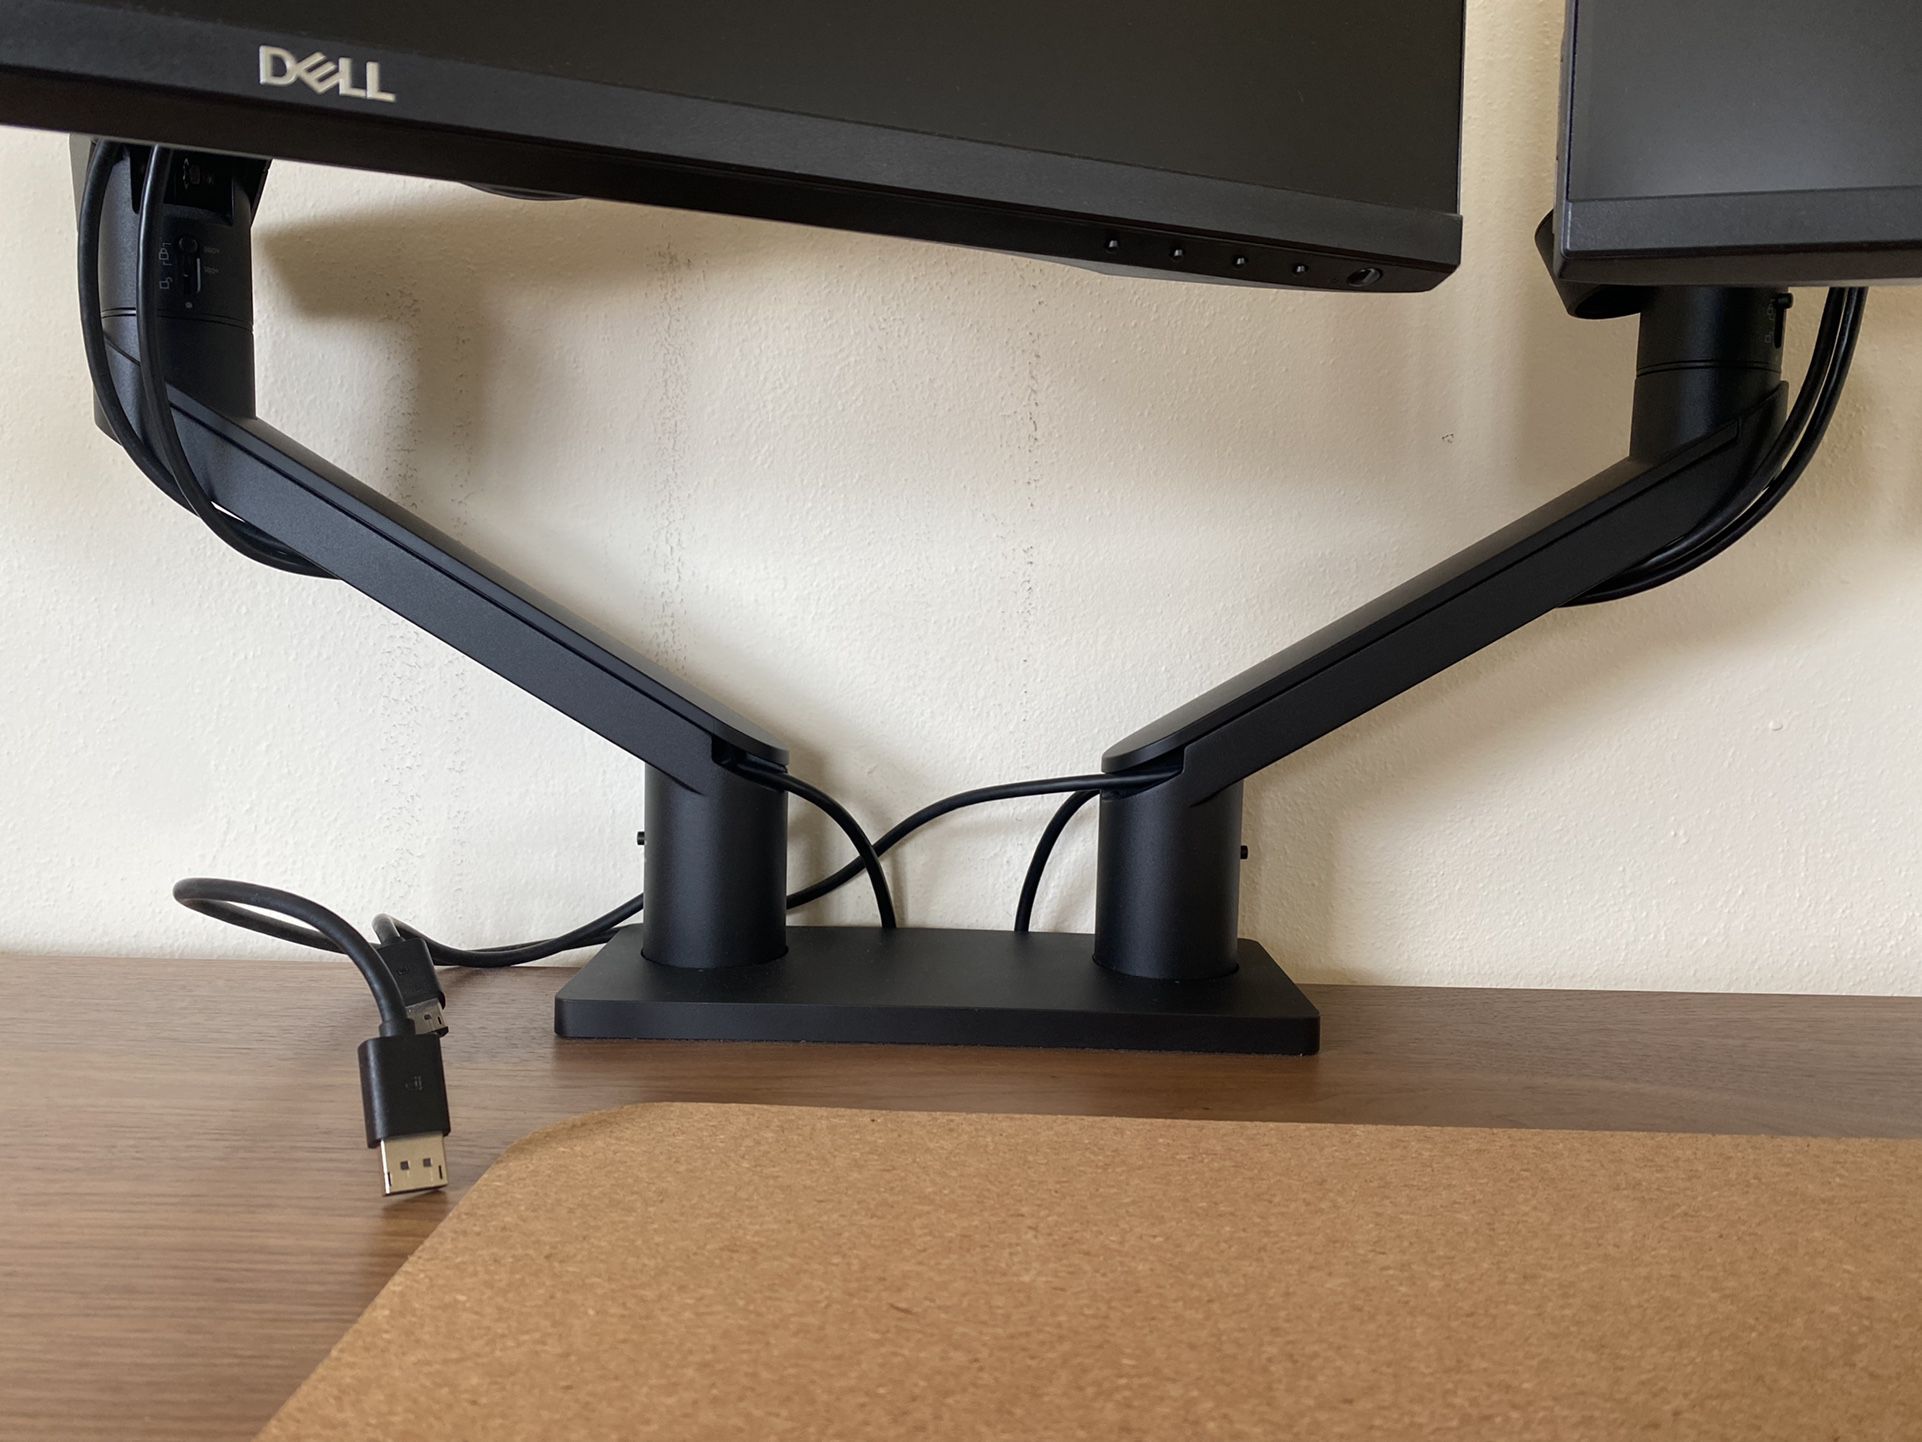 Two DELL 24” Monitors + Monitor Arm for Sale in Seattle, WA - OfferUp